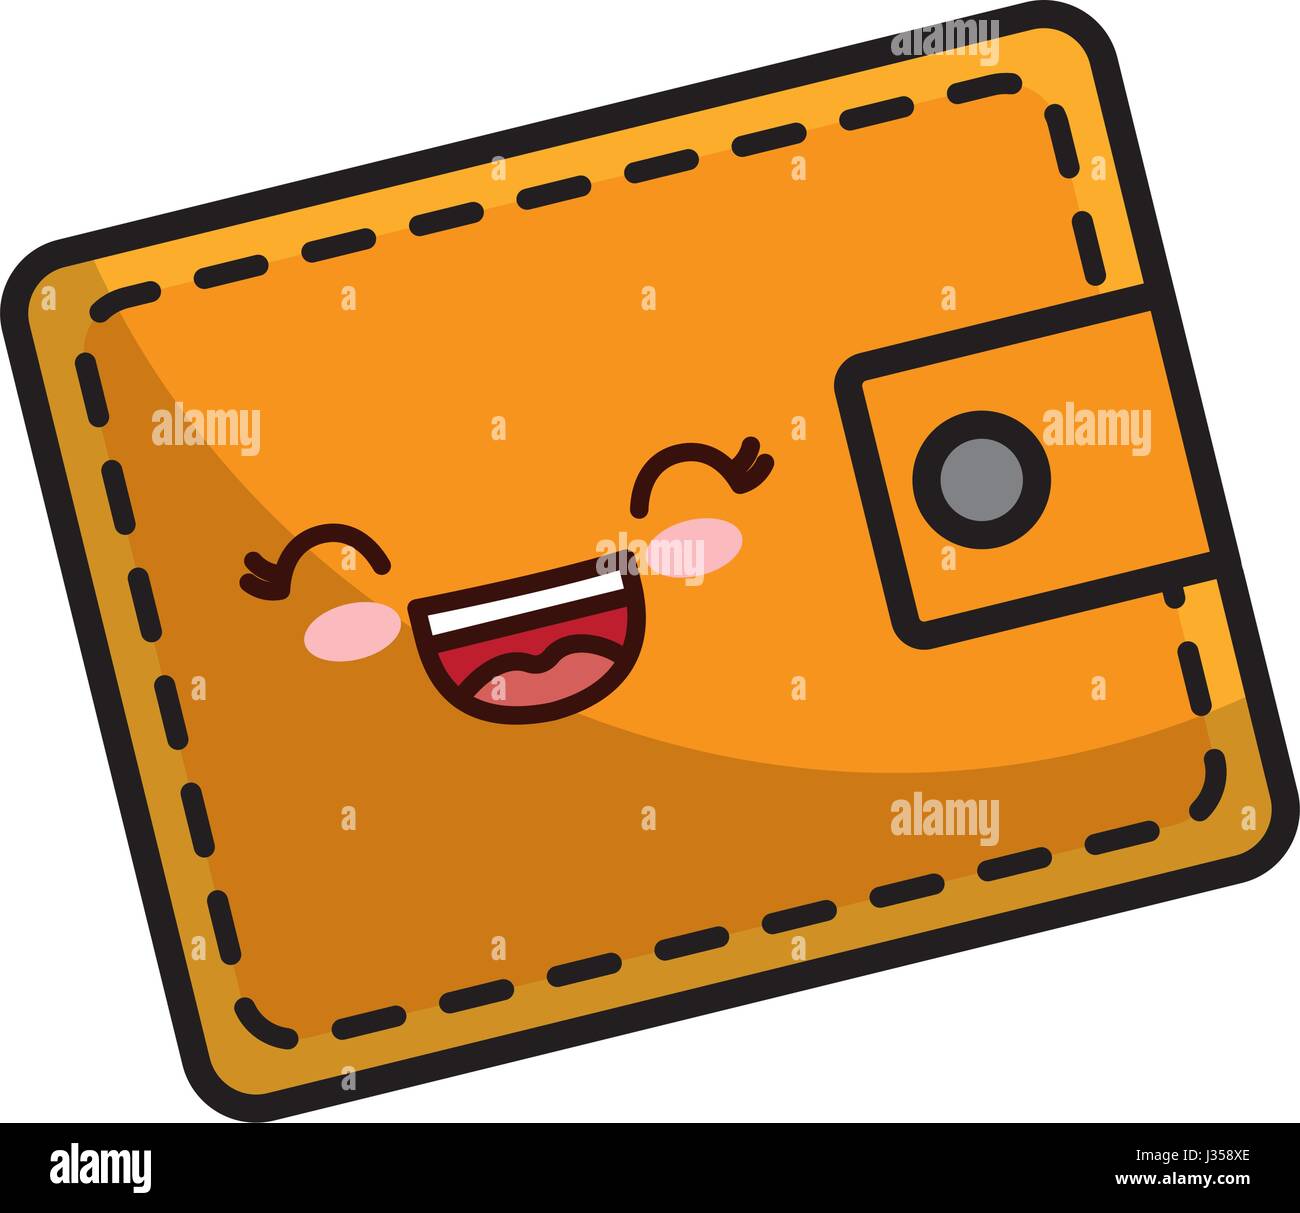 Funny Wallet High Resolution Stock Photography and Images - Alamy